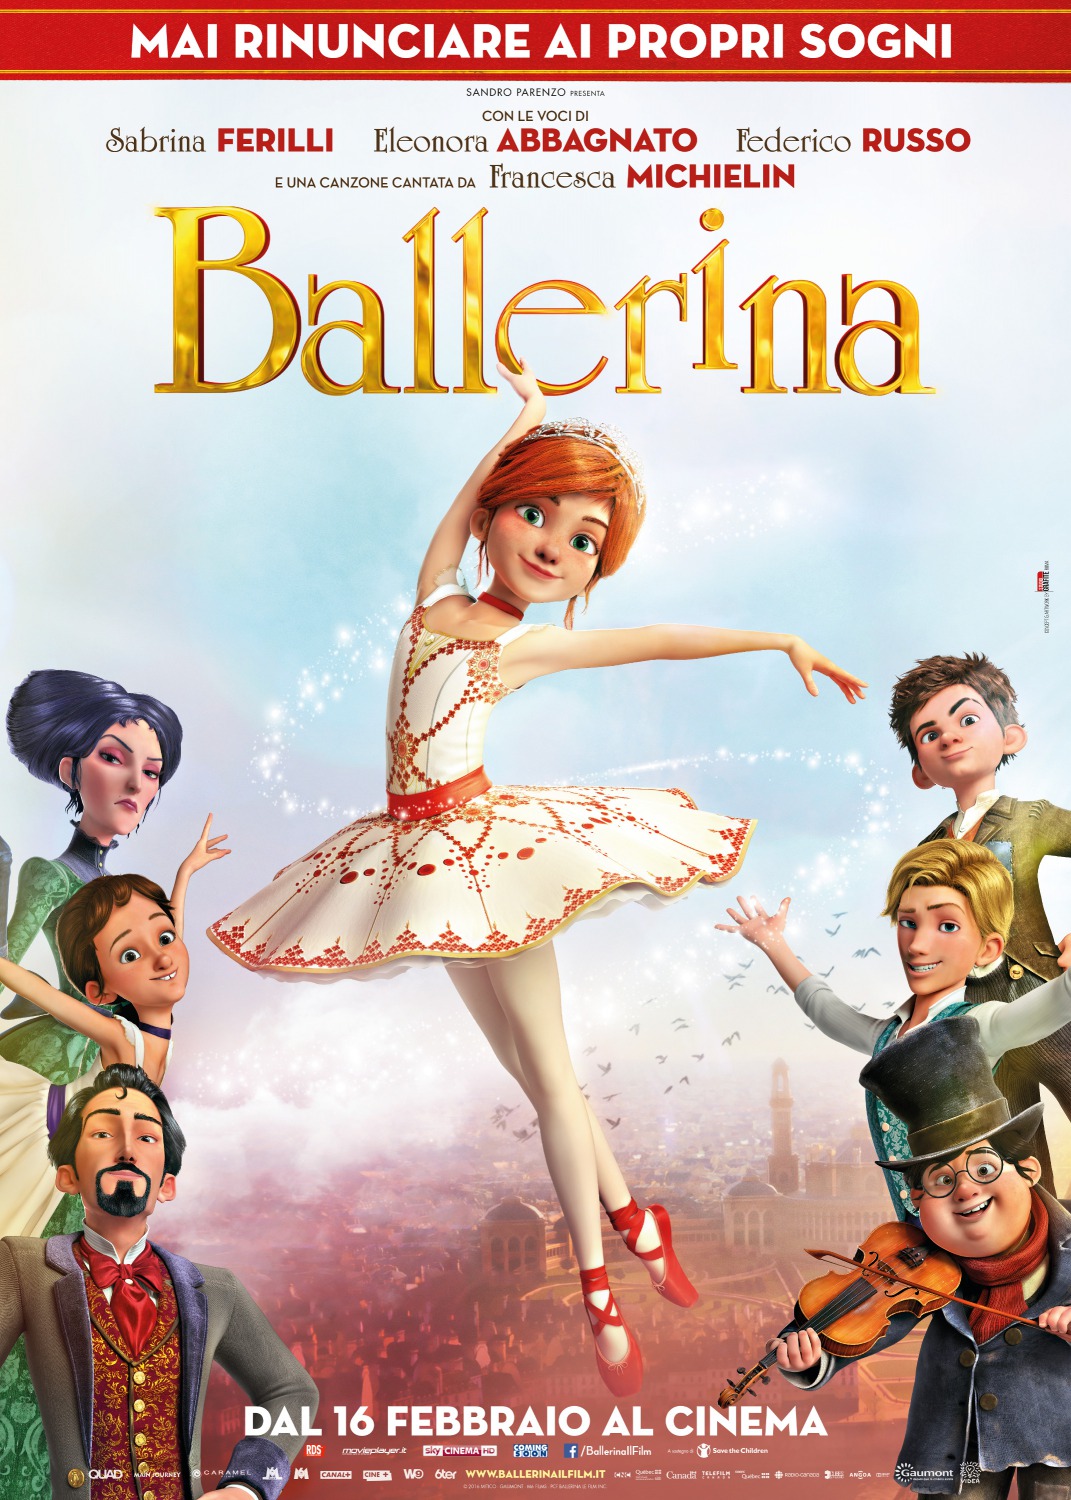 LEAP! (BALLERINA) Trailers, Clips, Featurettes, Images and 